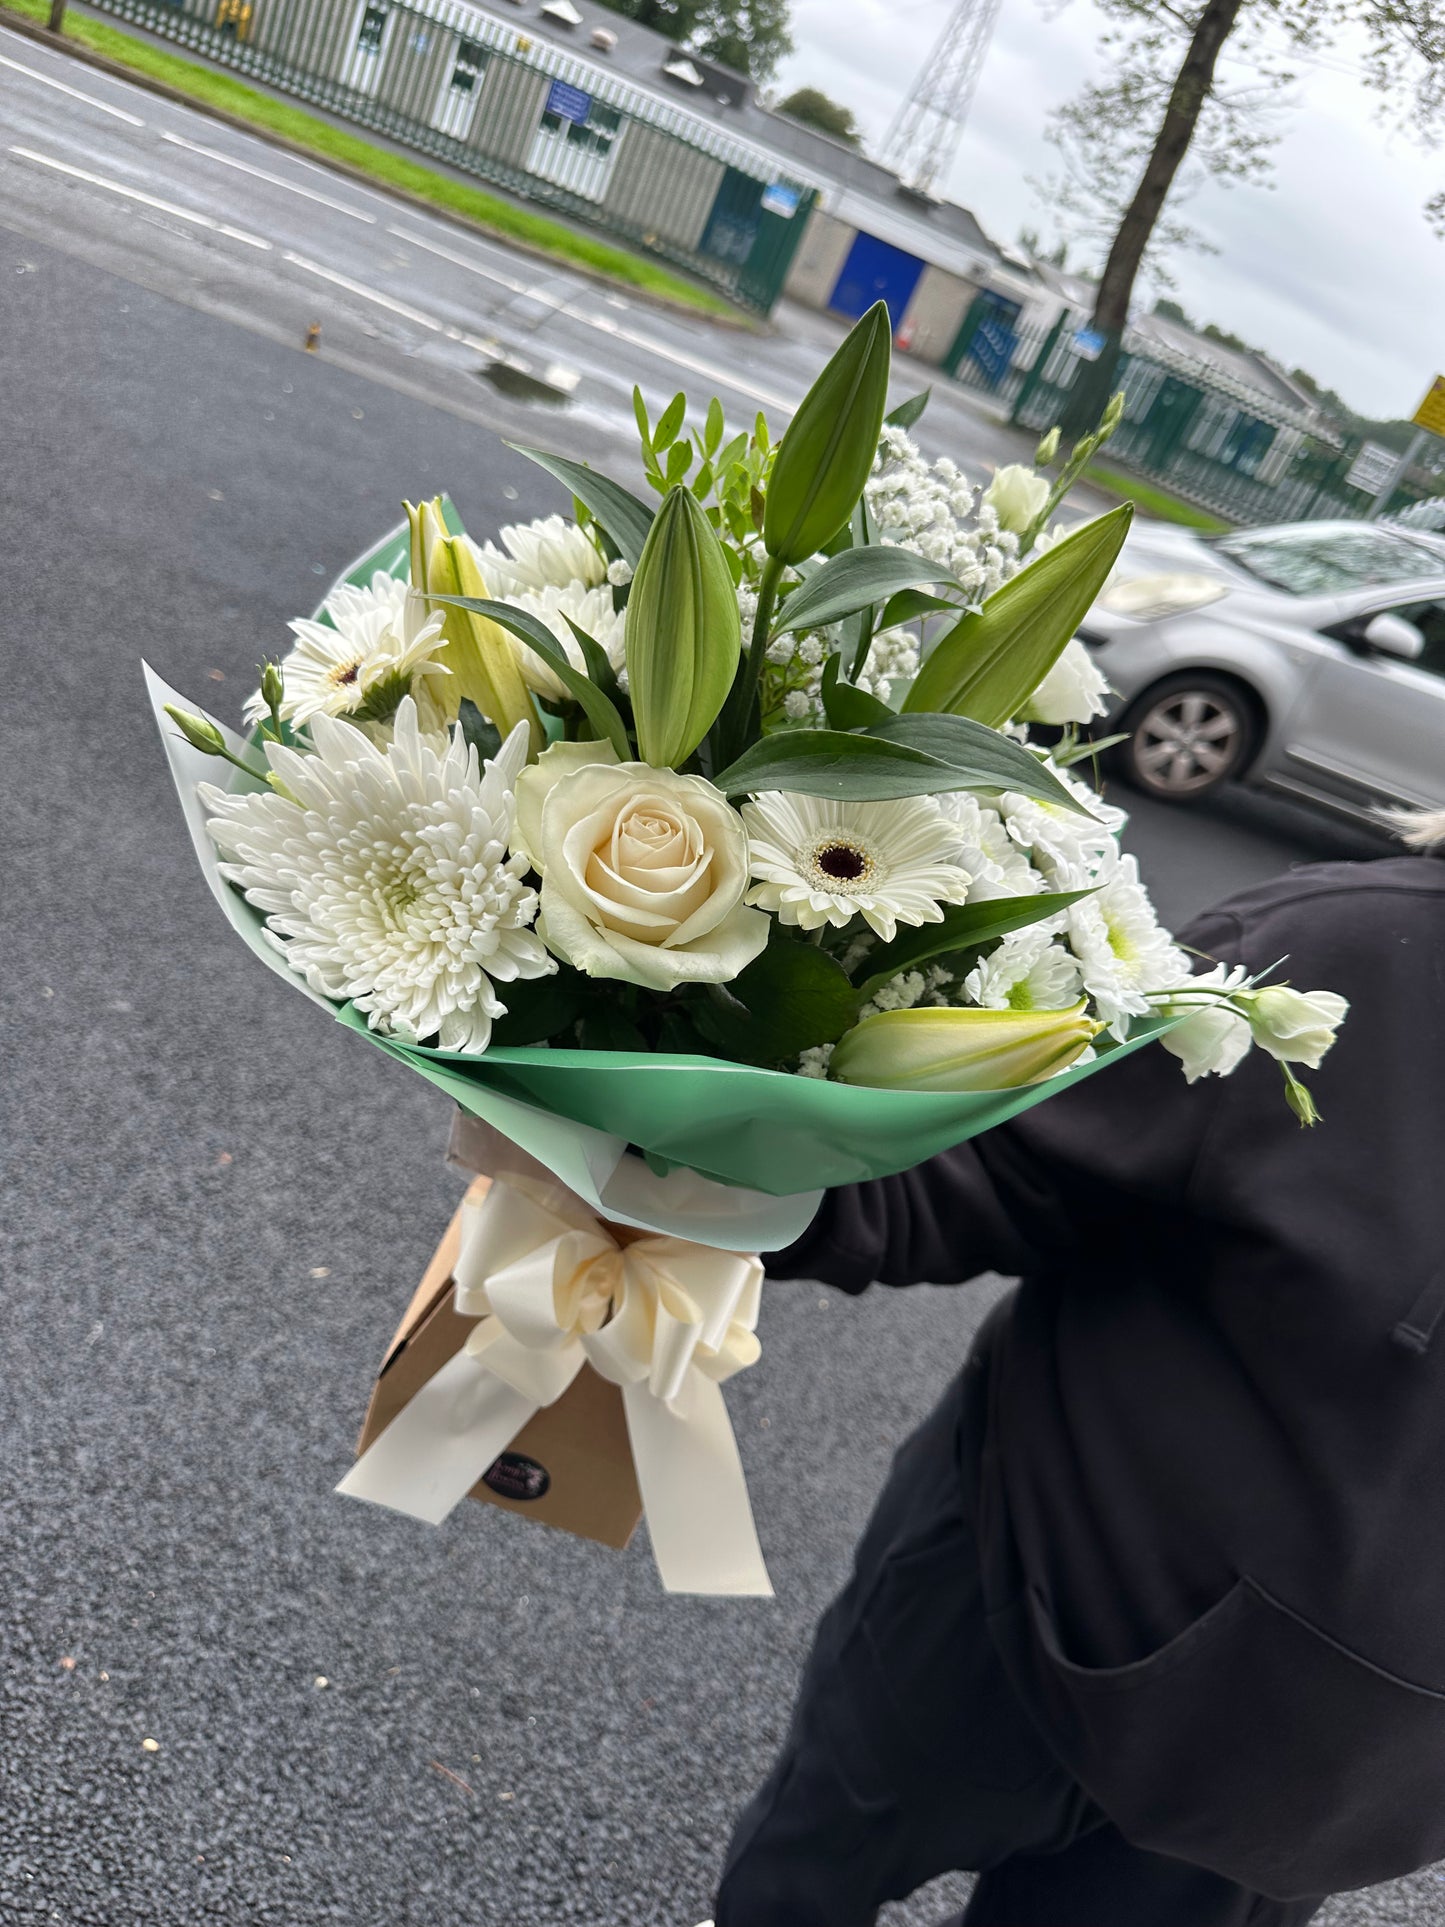 Flower Bouquet Presented in Small Box